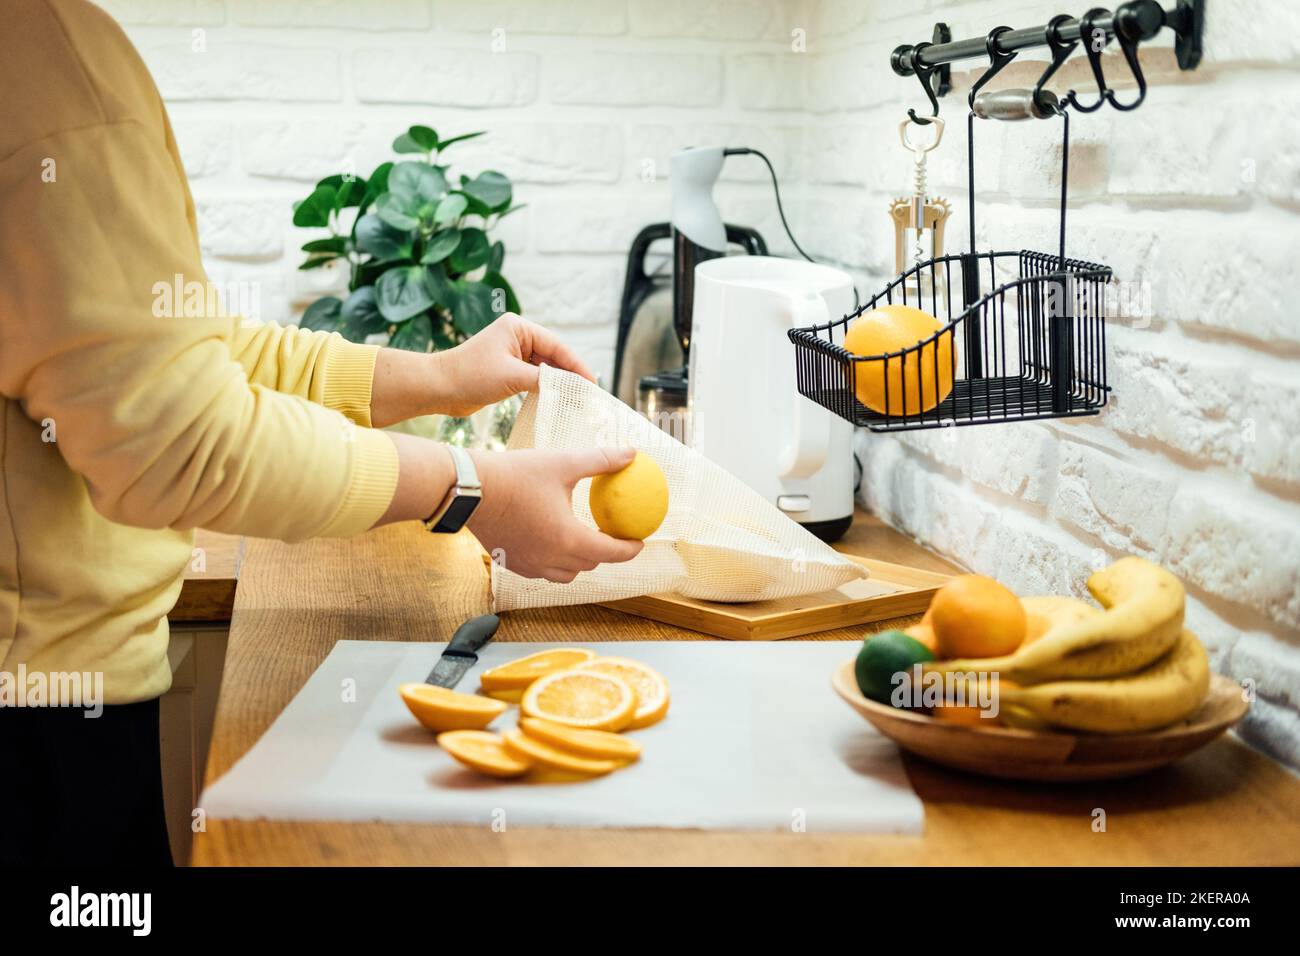 How to Dry Orange Slices for Holiday Decor. Process of Drying Orange Slices in the Oven. Woman cutting slices of orange and citrus fruits for drying Stock Photo